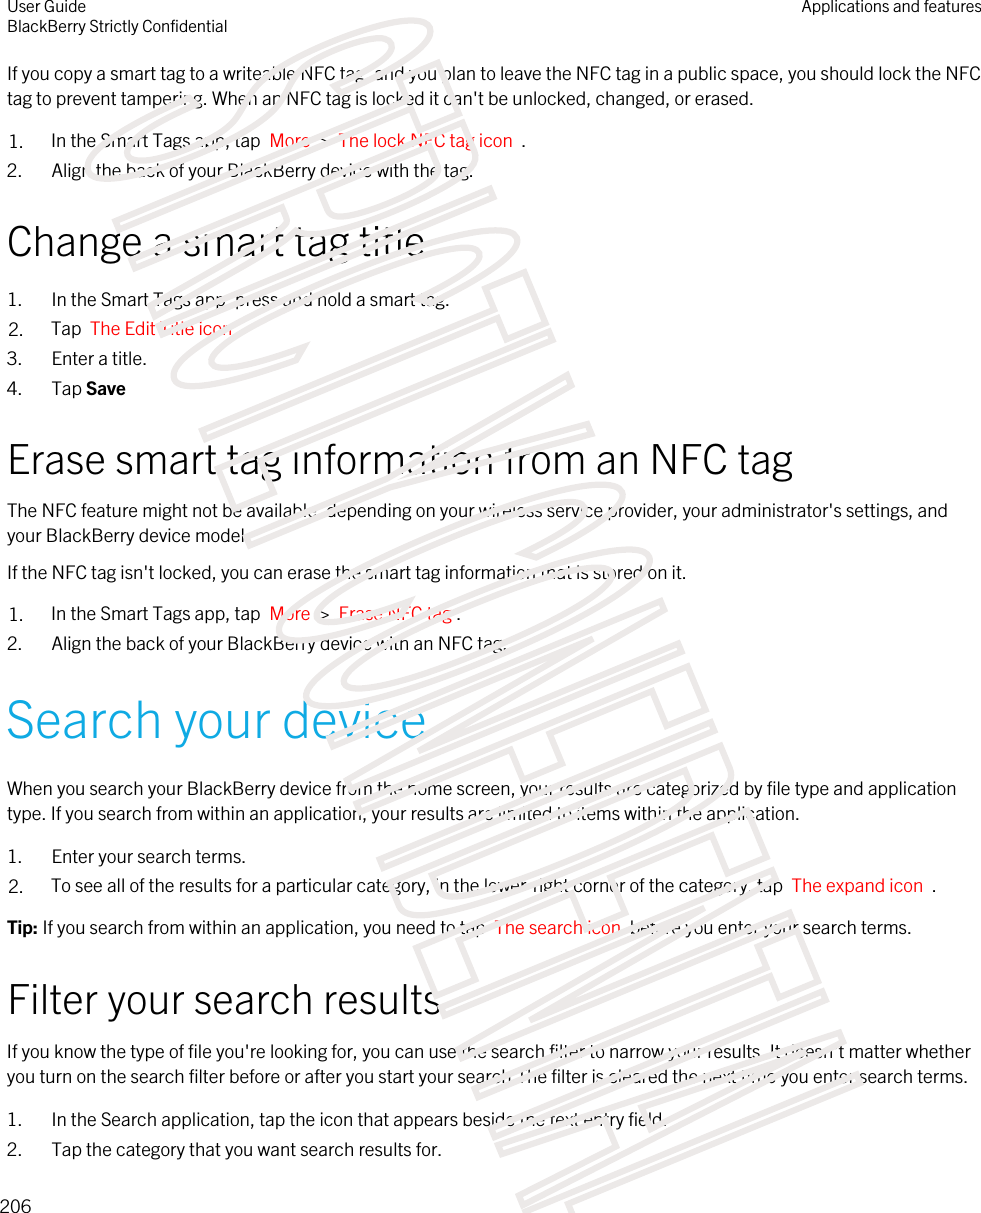 If you copy a smart tag to a writeable NFC tag, and you plan to leave the NFC tag in a public space, you should lock the NFC tag to prevent tampering. When an NFC tag is locked it can&apos;t be unlocked, changed, or erased.1. In the Smart Tags app, tap  More  &gt;  The lock NFC tag icon  .2. Align the back of your BlackBerry device with the tag.Change a smart tag title1. In the Smart Tags app, press and hold a smart tag.2. Tap  The Edit Title icon .3. Enter a title.4. Tap SaveErase smart tag information from an NFC tagThe NFC feature might not be available, depending on your wireless service provider, your administrator&apos;s settings, and your BlackBerry device model.If the NFC tag isn&apos;t locked, you can erase the smart tag information that is stored on it.1. In the Smart Tags app, tap  More  &gt;  Erase NFC tag .2. Align the back of your BlackBerry device with an NFC tag.Search your deviceWhen you search your BlackBerry device from the home screen, your results are categorized by file type and application type. If you search from within an application, your results are limited to items within the application.1. Enter your search terms.2. To see all of the results for a particular category, in the lower-right corner of the category, tap  The expand icon  .Tip: If you search from within an application, you need to tap  The search icon  before you enter your search terms.Filter your search resultsIf you know the type of file you&apos;re looking for, you can use the search filter to narrow your results. It doesn&apos;t matter whether you turn on the search filter before or after you start your search.The filter is cleared the next time you enter search terms.1. In the Search application, tap the icon that appears beside the text entry field.2. Tap the category that you want search results for.User GuideBlackBerry Strictly ConfidentialApplications and features206STRICTLY CONFIDENTIAL